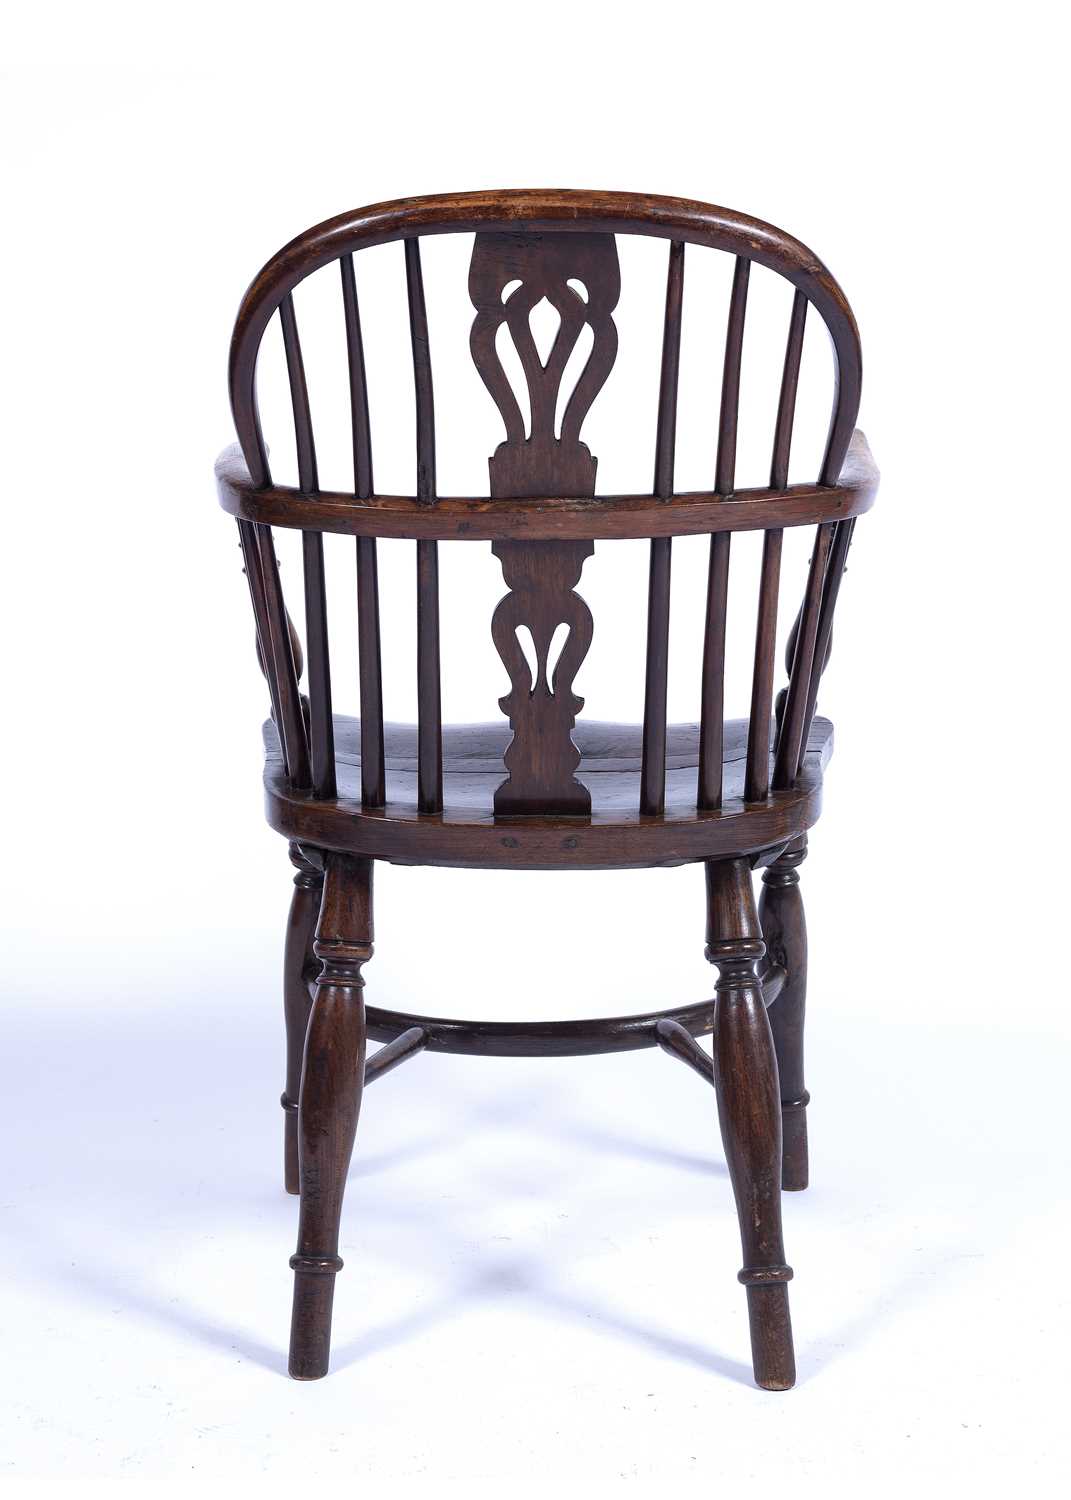 William Wheatland at Rockley Yew wood Windsor chair, with pierced splat, and crinoline stretcher, - Image 3 of 5